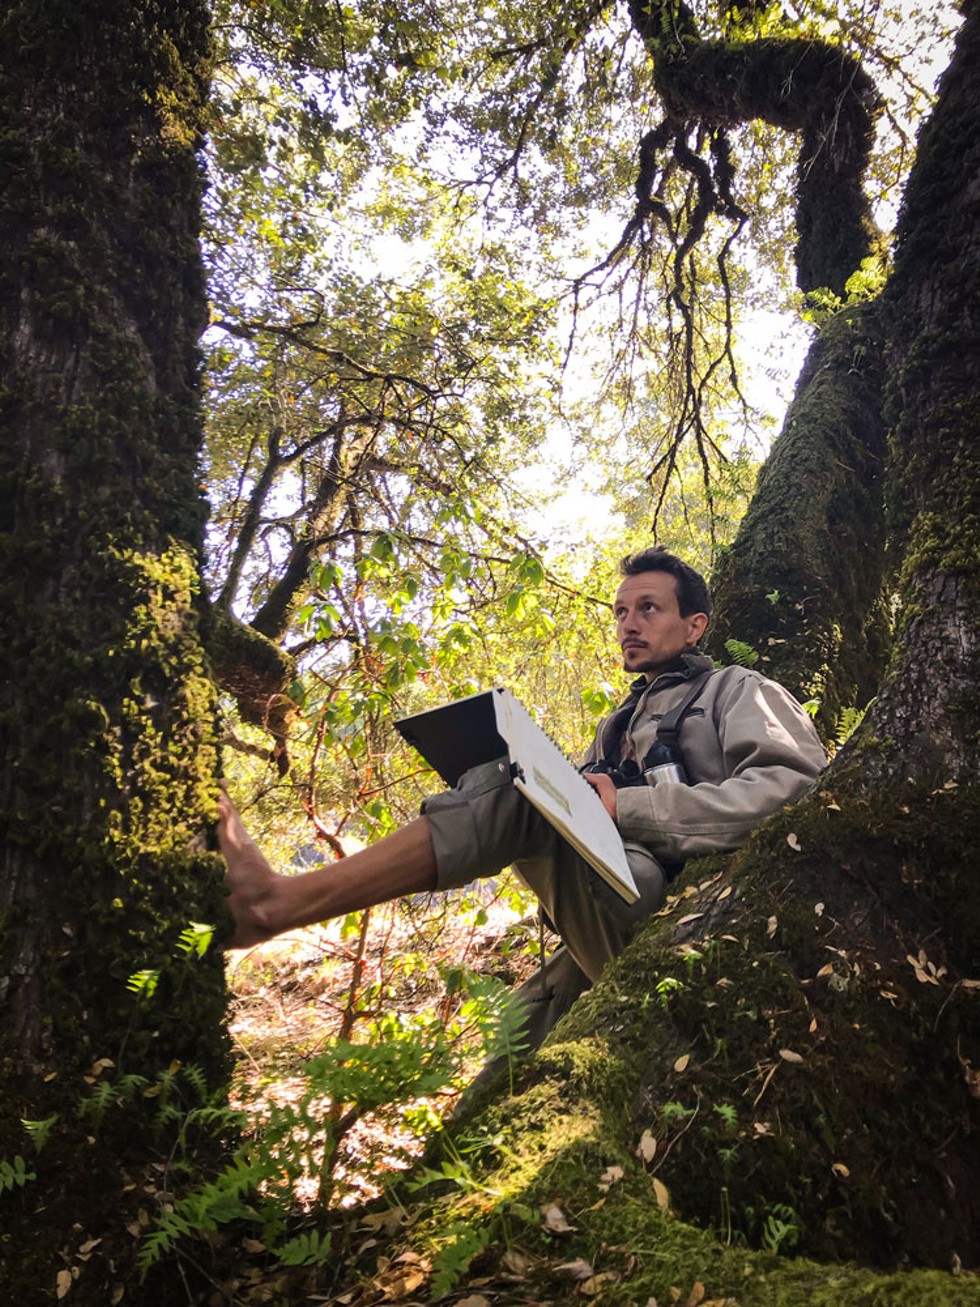 Marley Peifer nature journaling as part of an effort to demystify controlled burns. - PHOTO BY LAURIE WIGHAM.